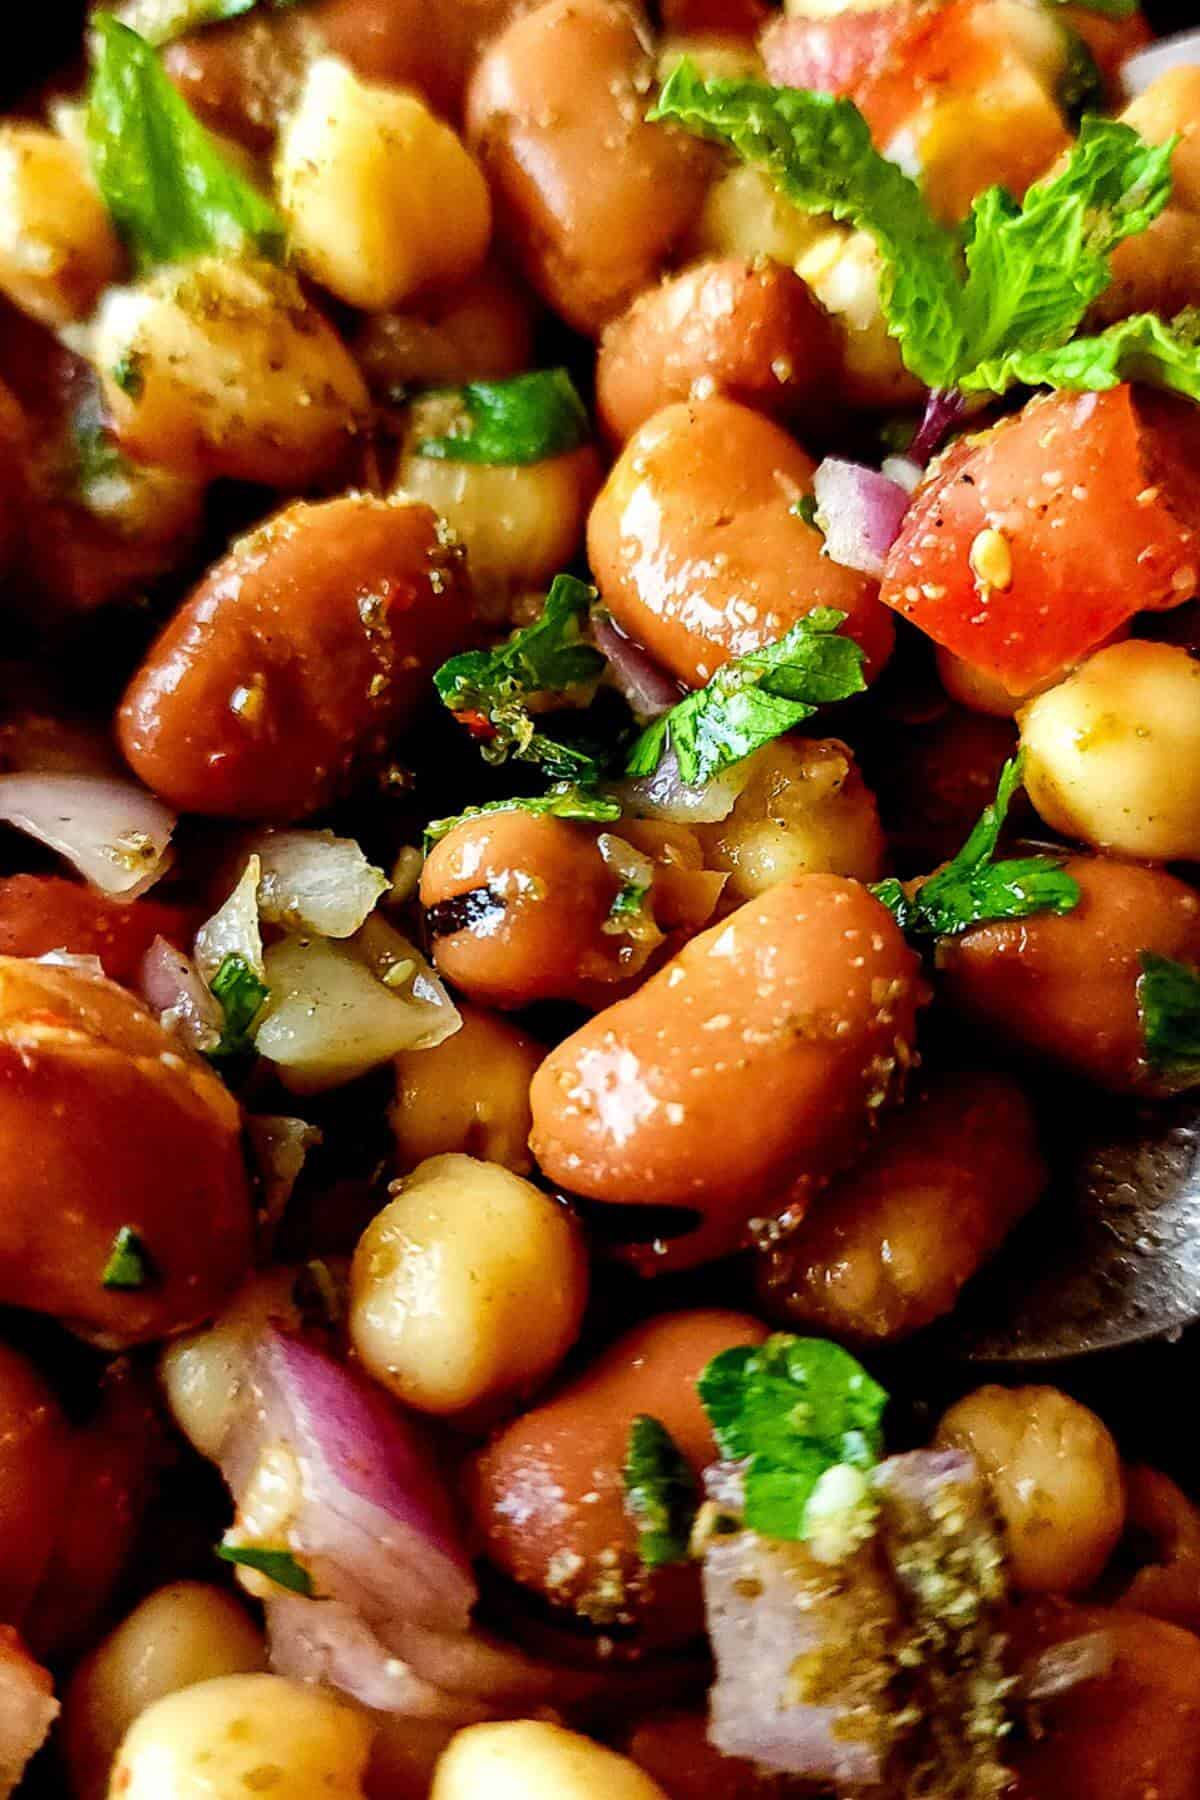 Vegan chickpea and fava bean salad garnished with fresh herbs.